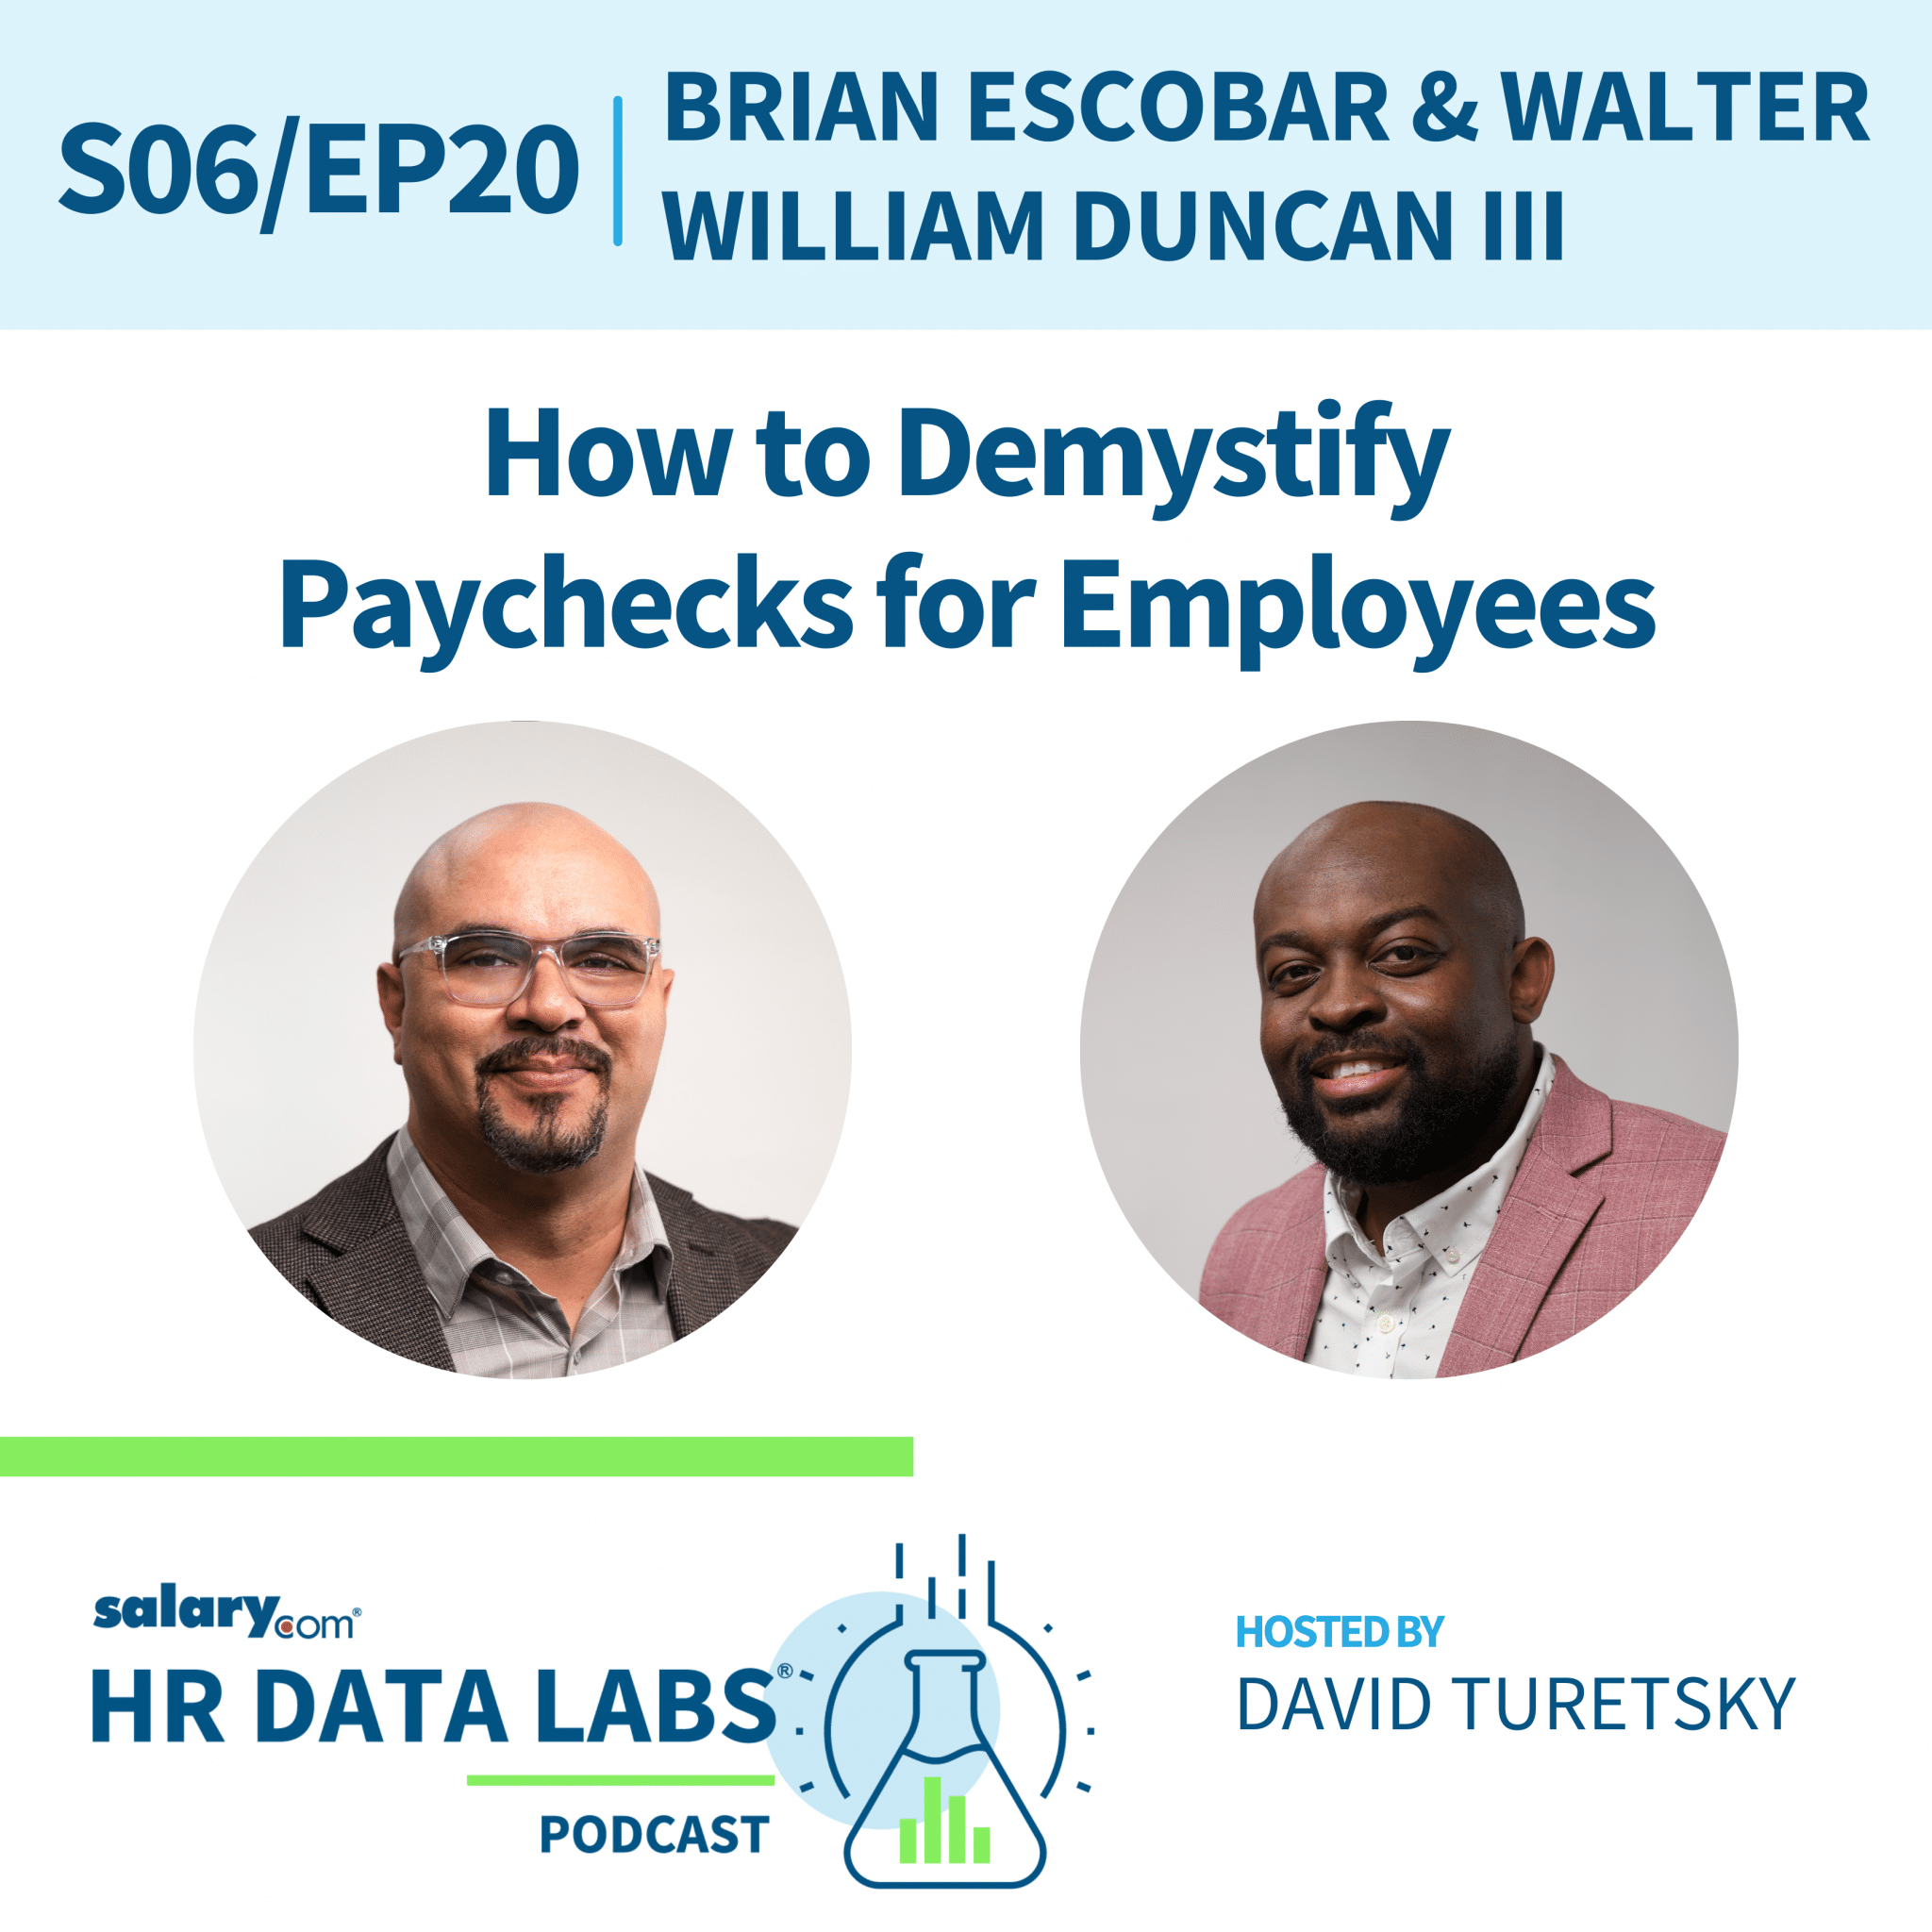 Brian Escobar and Walter William Duncan III – How to Demystify Paychecks for Employees